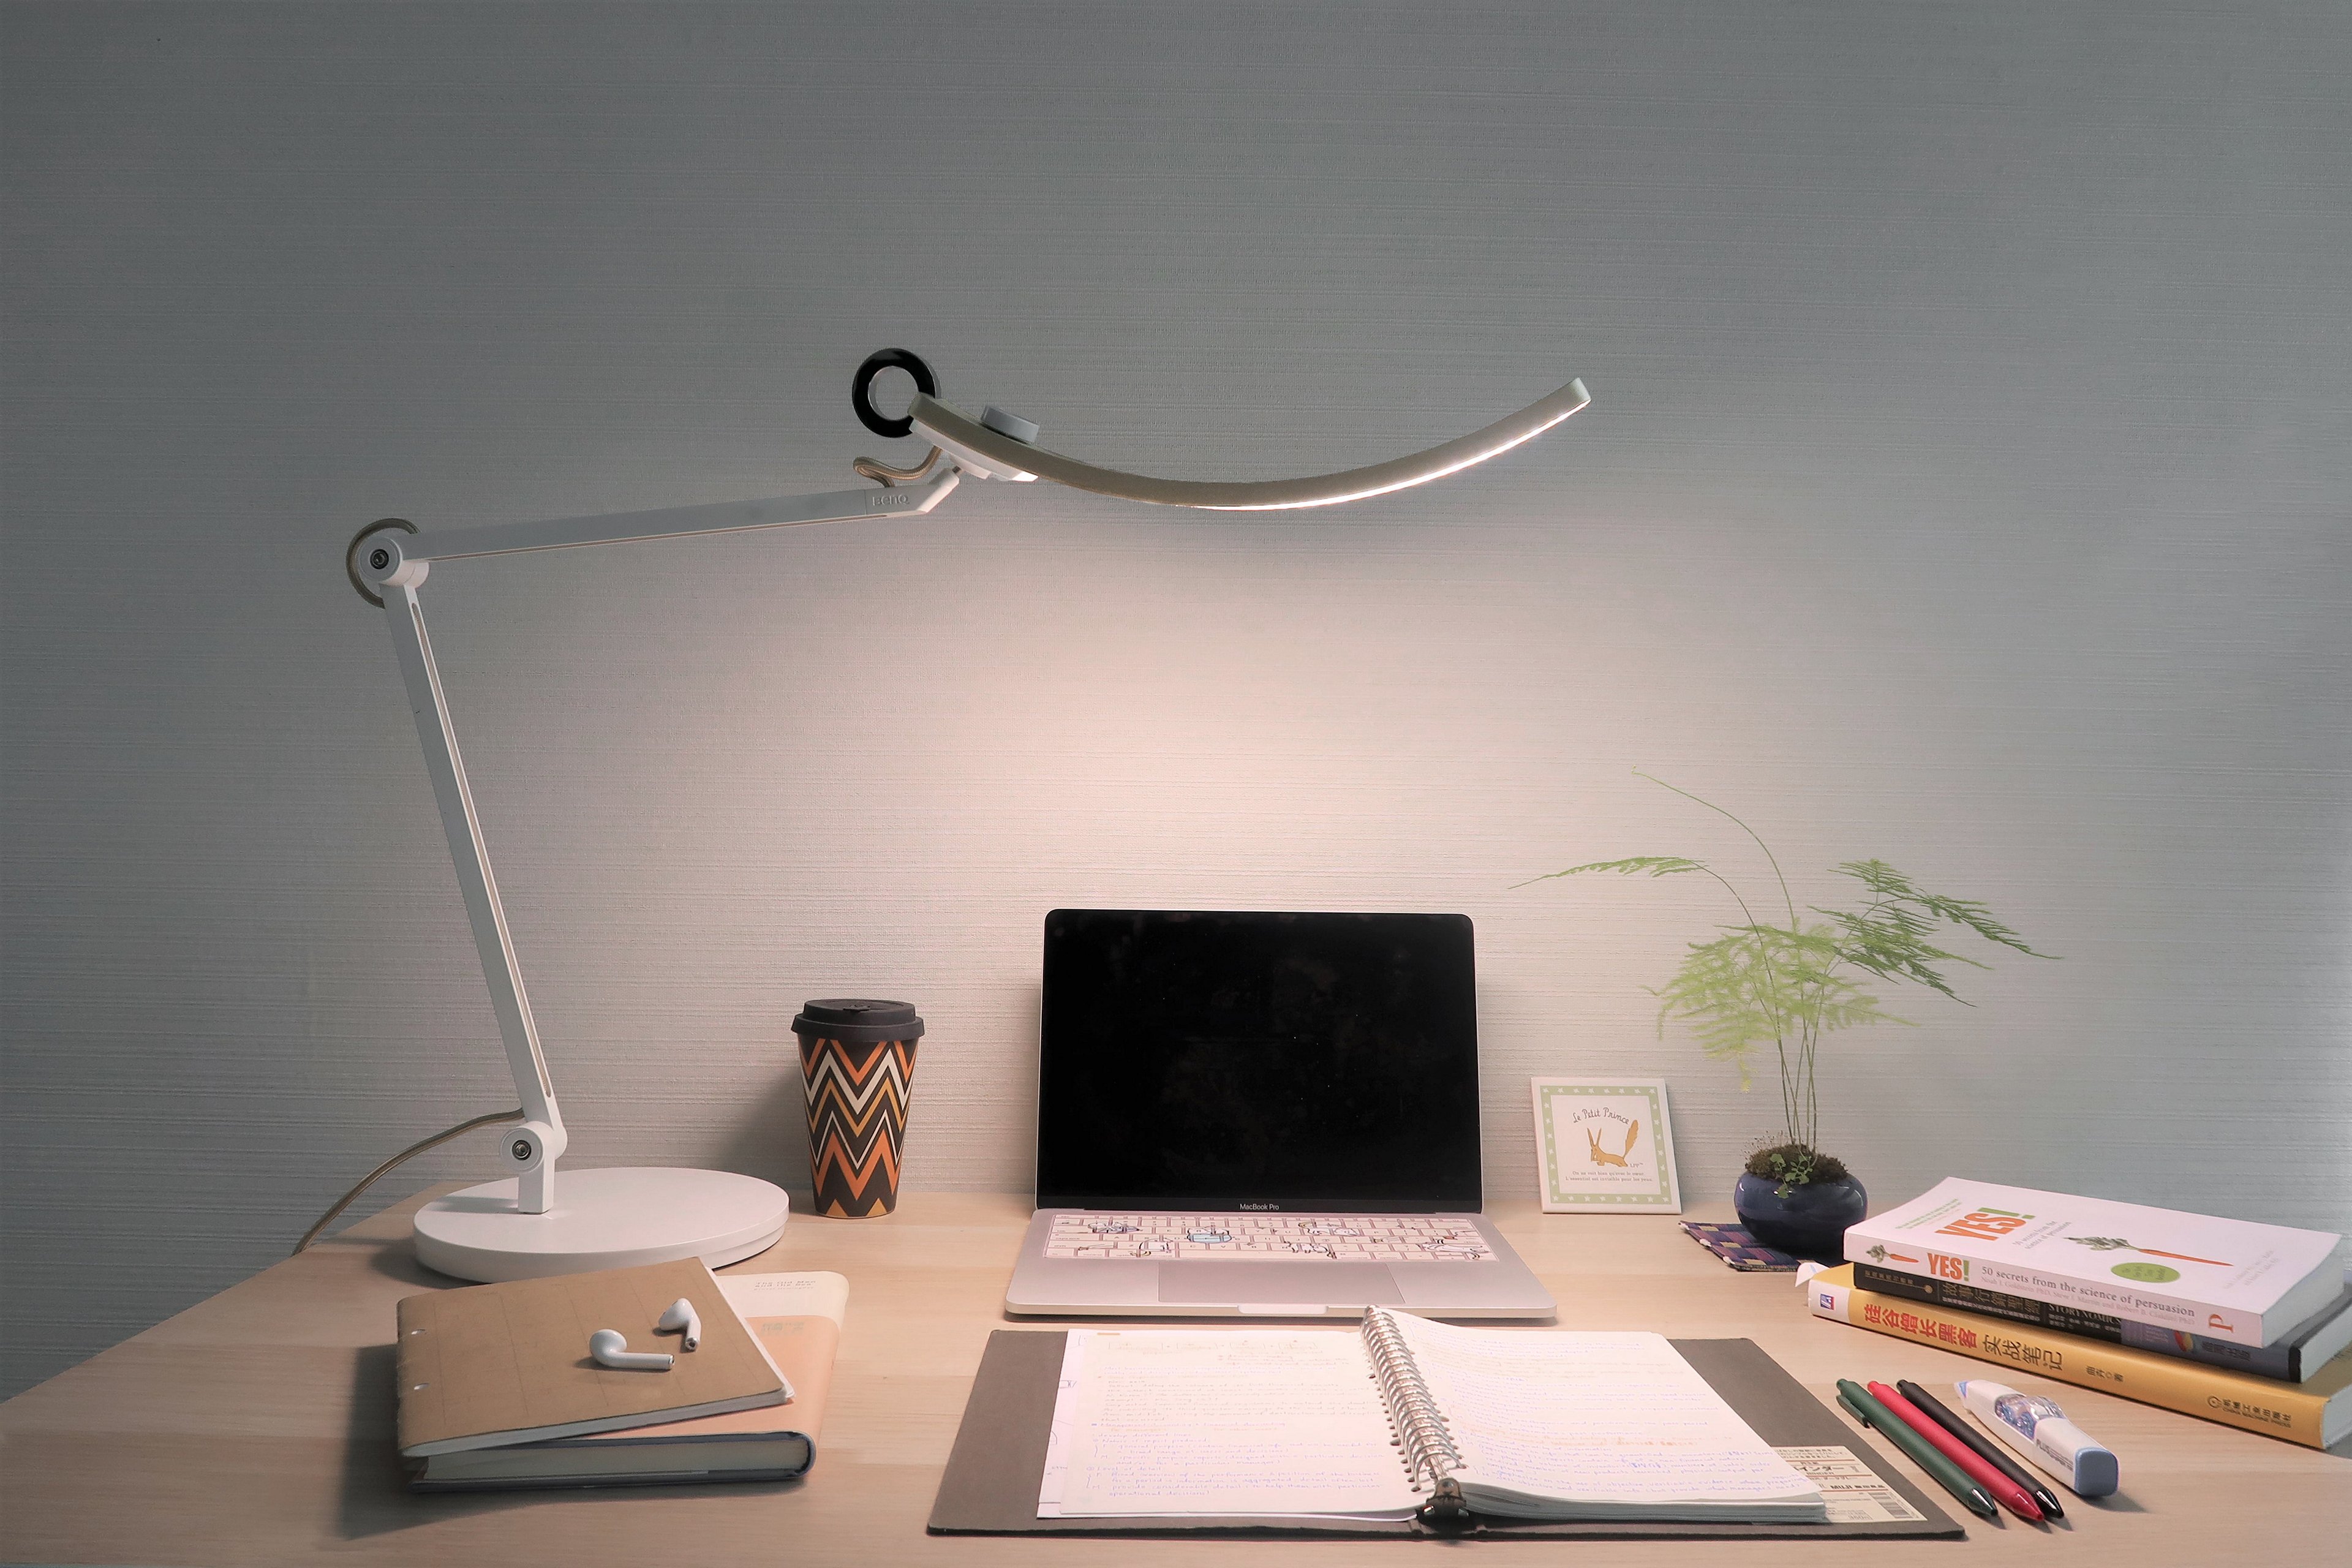 E-reading lamps have a built-in sensor, so that with just a simple tap they auto adjust brightness throughout the day to deliver 500 lumens to your desk.